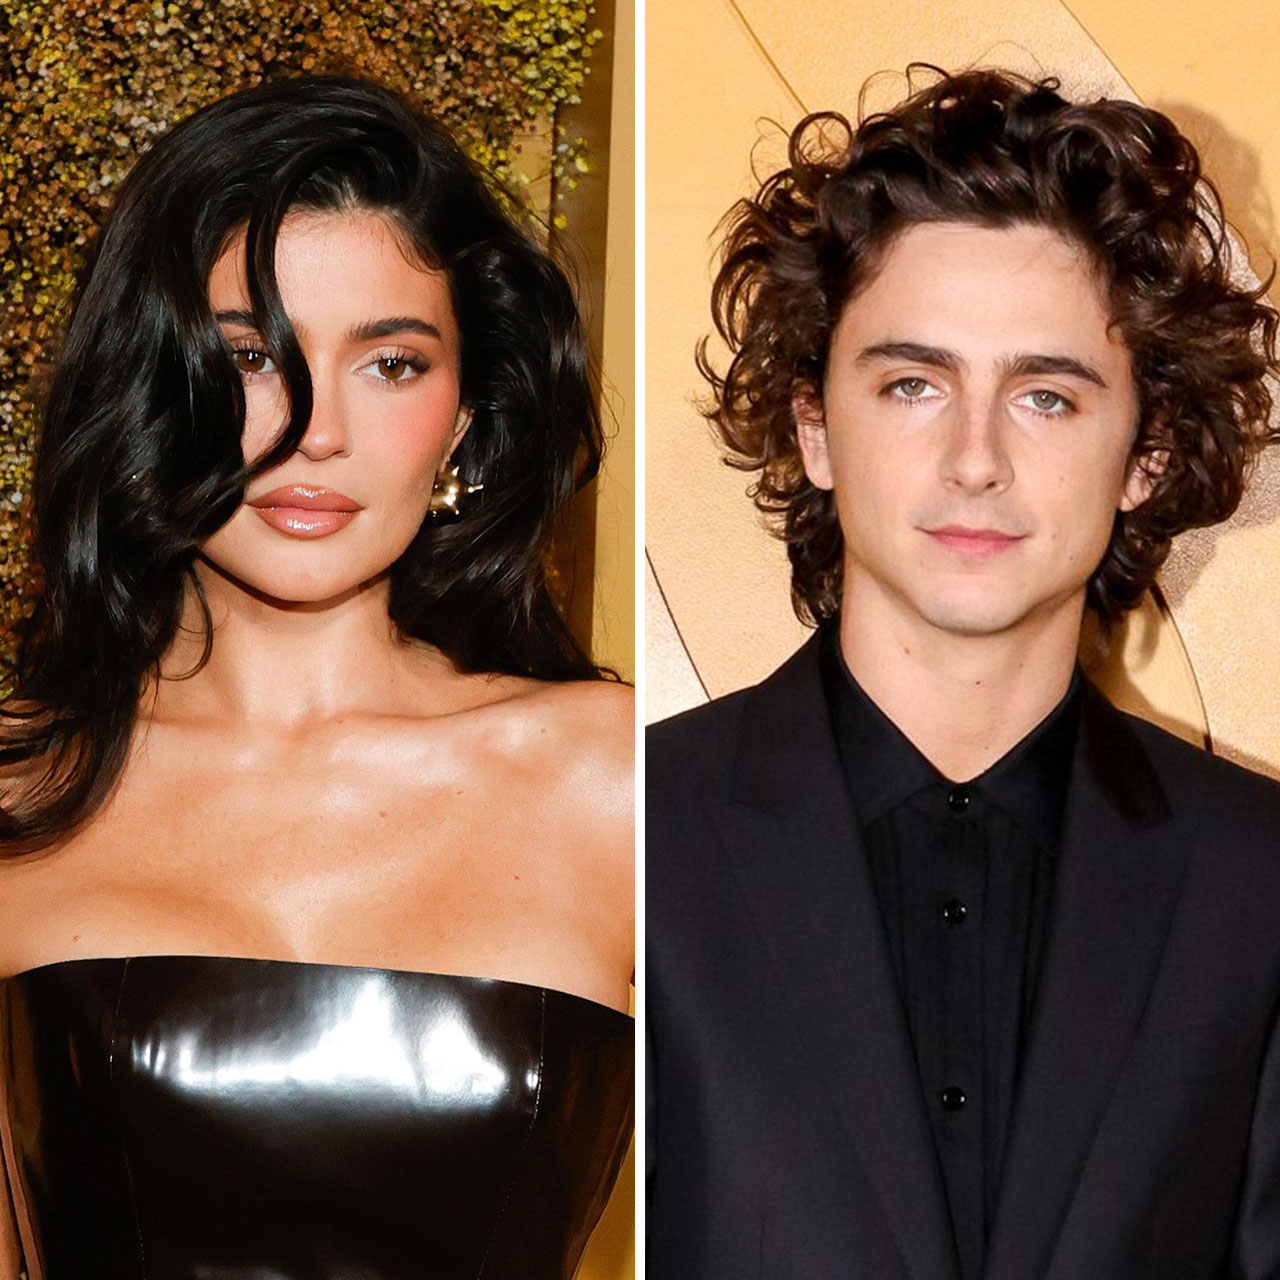 Kylie Jenner and Timothée Chalamet Valentine's Day Outfit